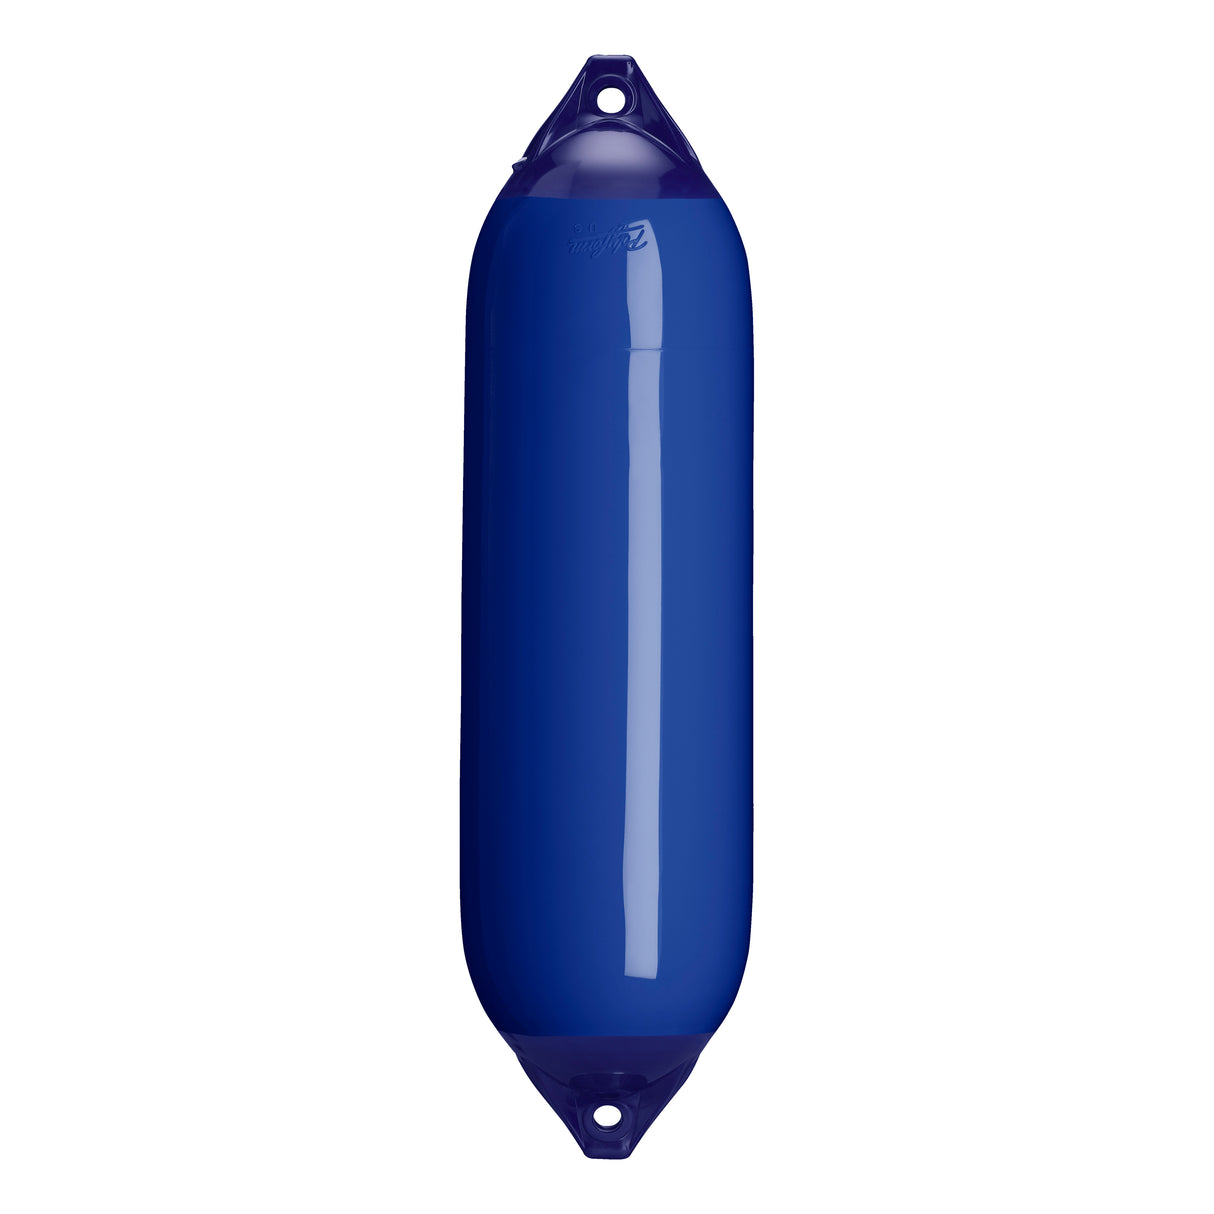 Cobalt Blue boat fender with Navy-Top, Polyform F-6 